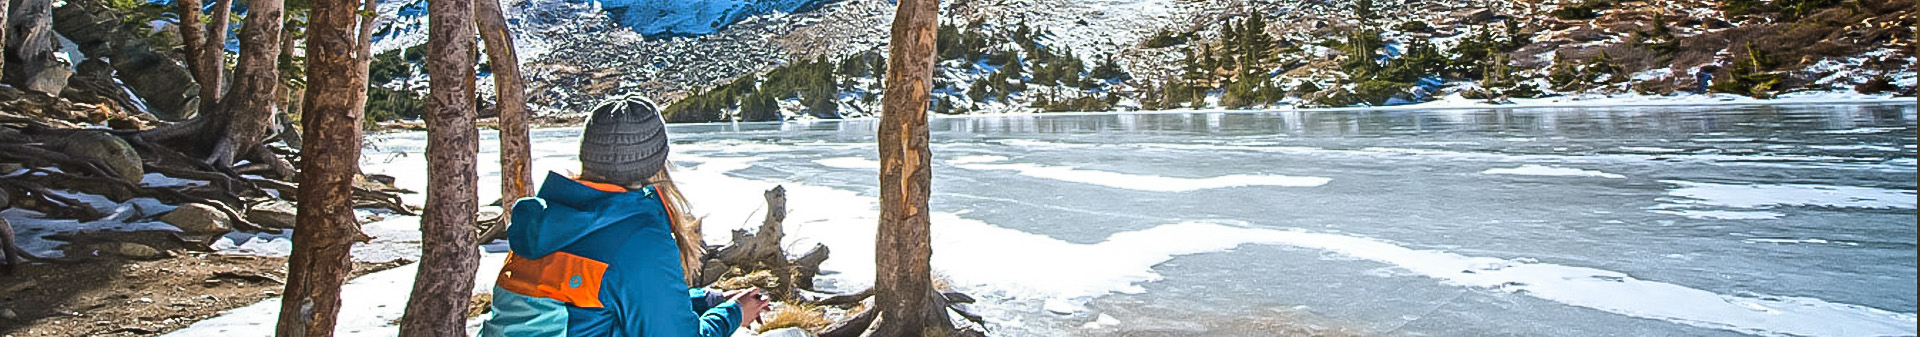 A frozen lake in Red River, NM